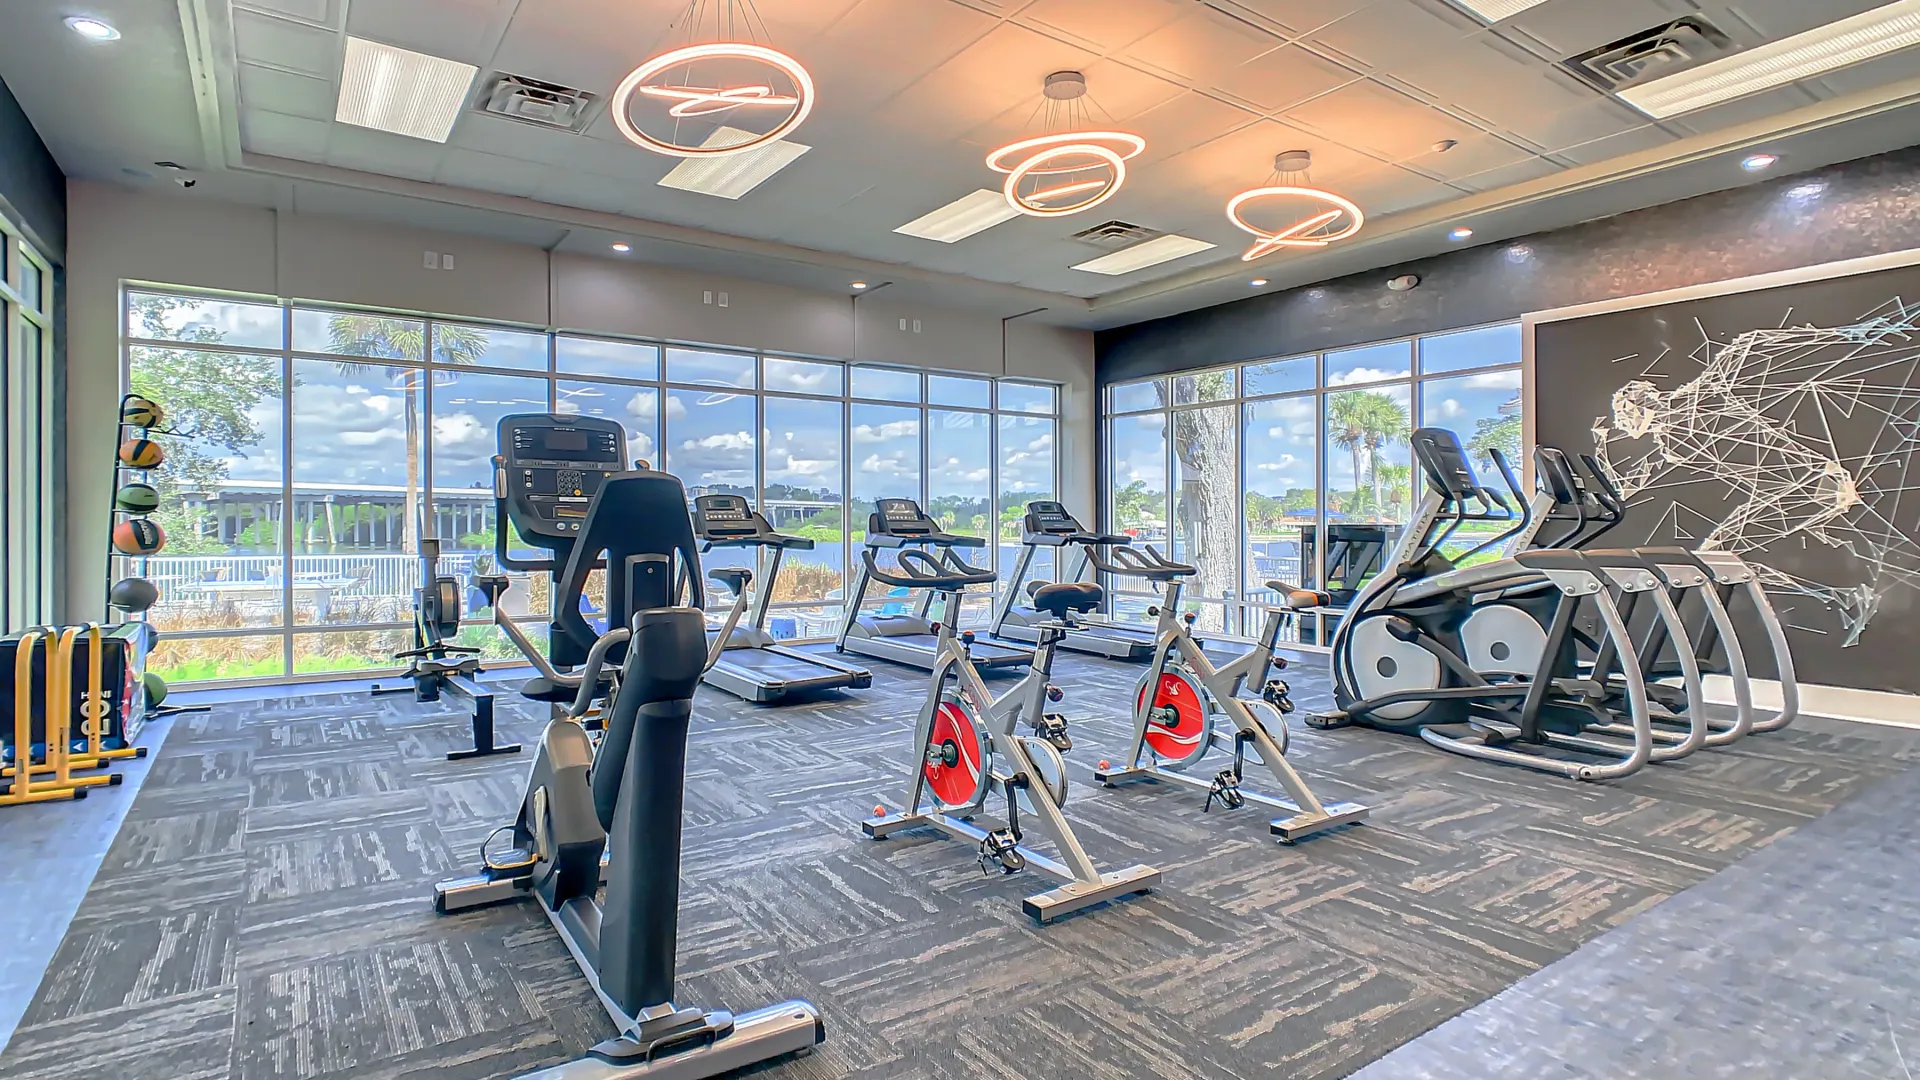 A jaw-dropping gym with contemporary lighting, wall-to-wall windows showcasing panoramic views of the pool and river, and rows of equipment including ellipticals, treadmills, rowers, and spinning bikes.